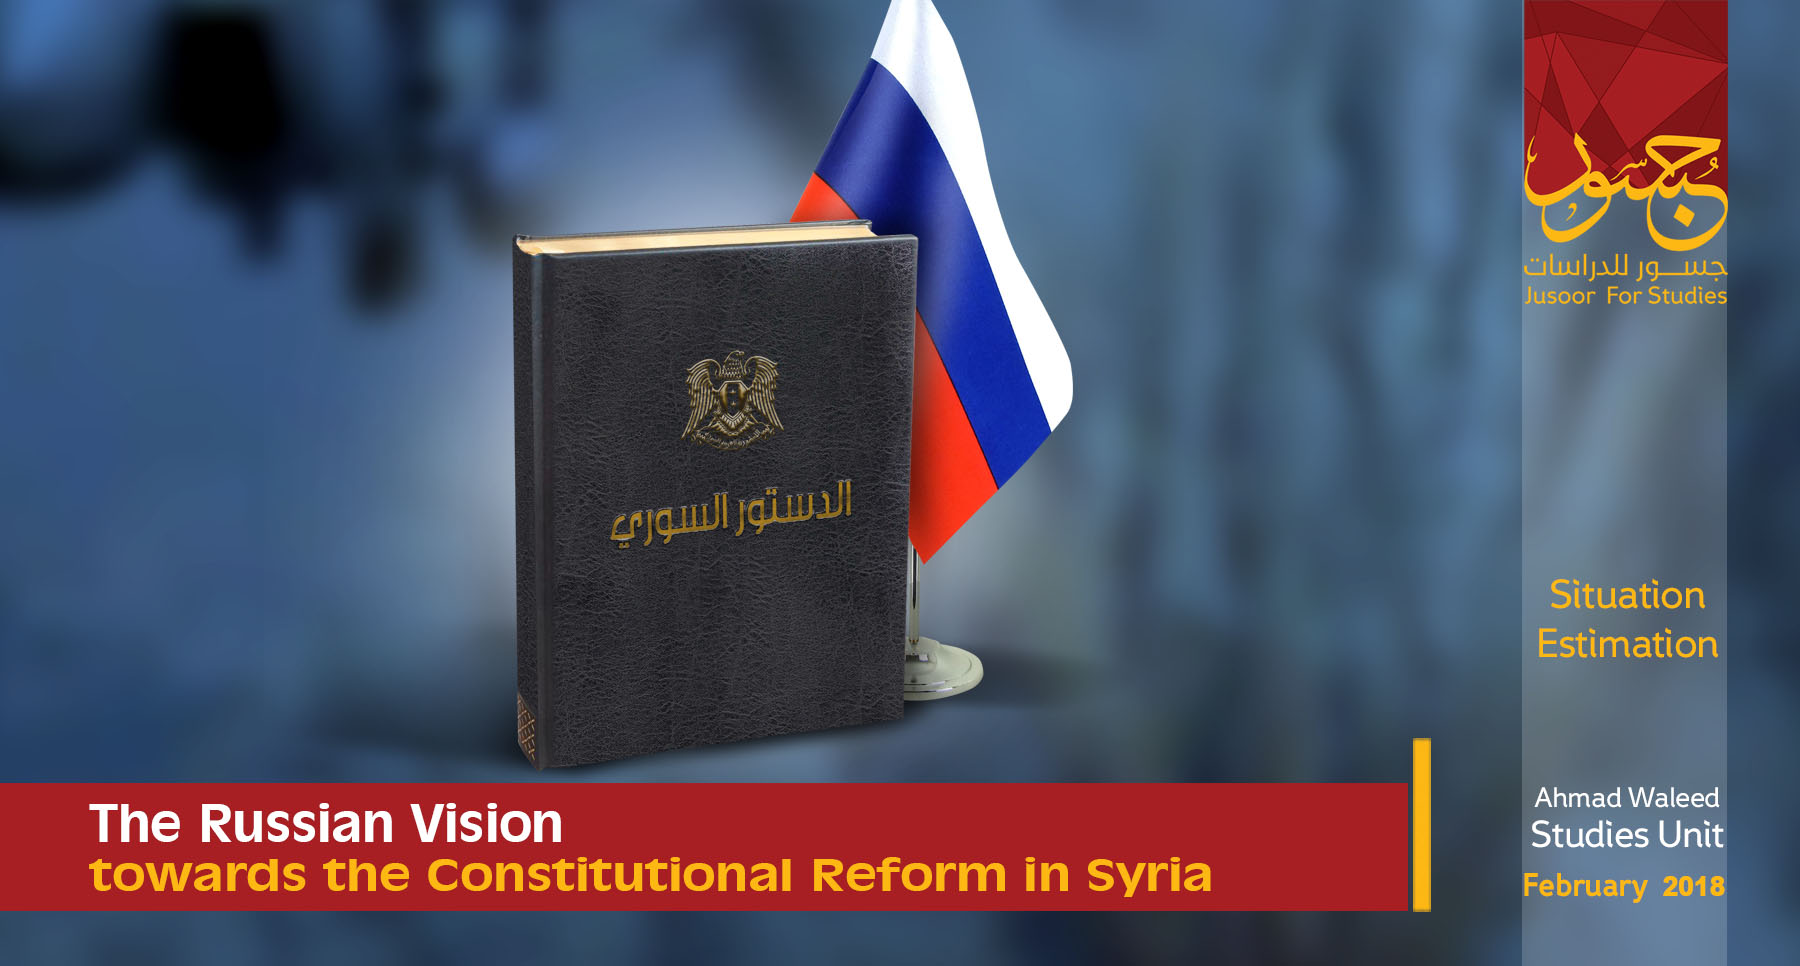 The Russian Vision towards the Constitutional Reform in Syria